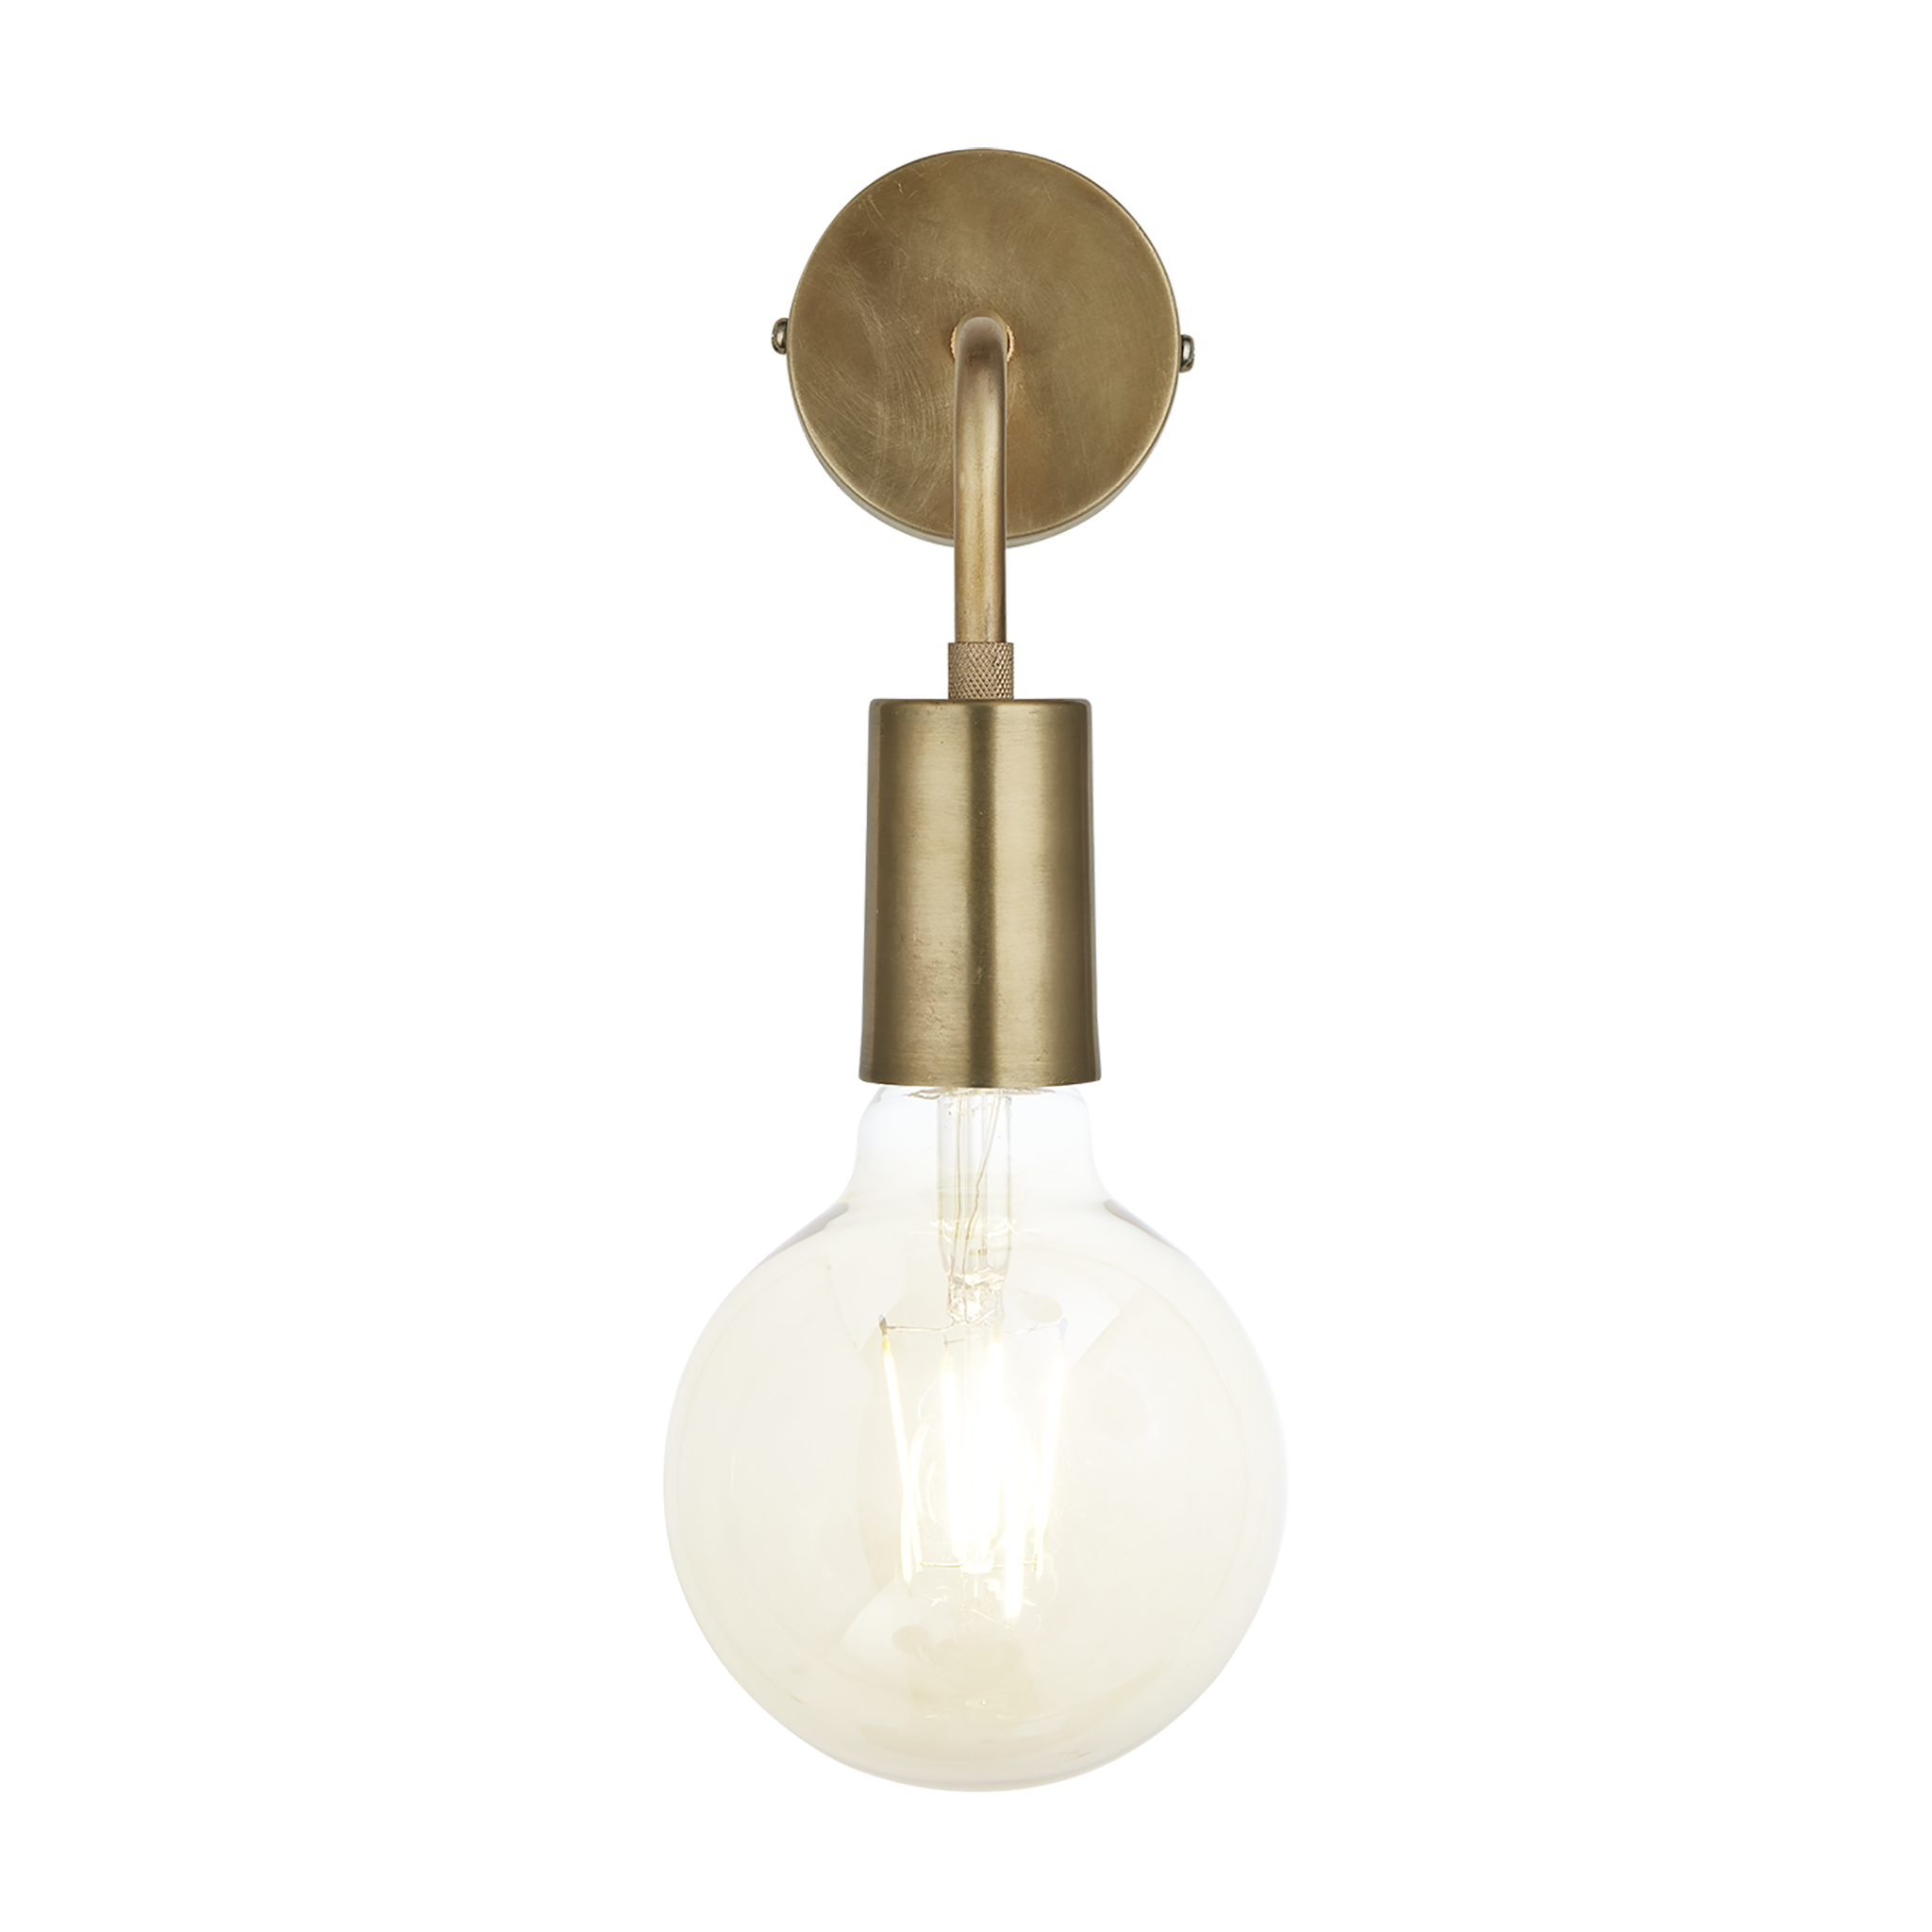 Wall Lamp Electric Free HQ Image PNG Image